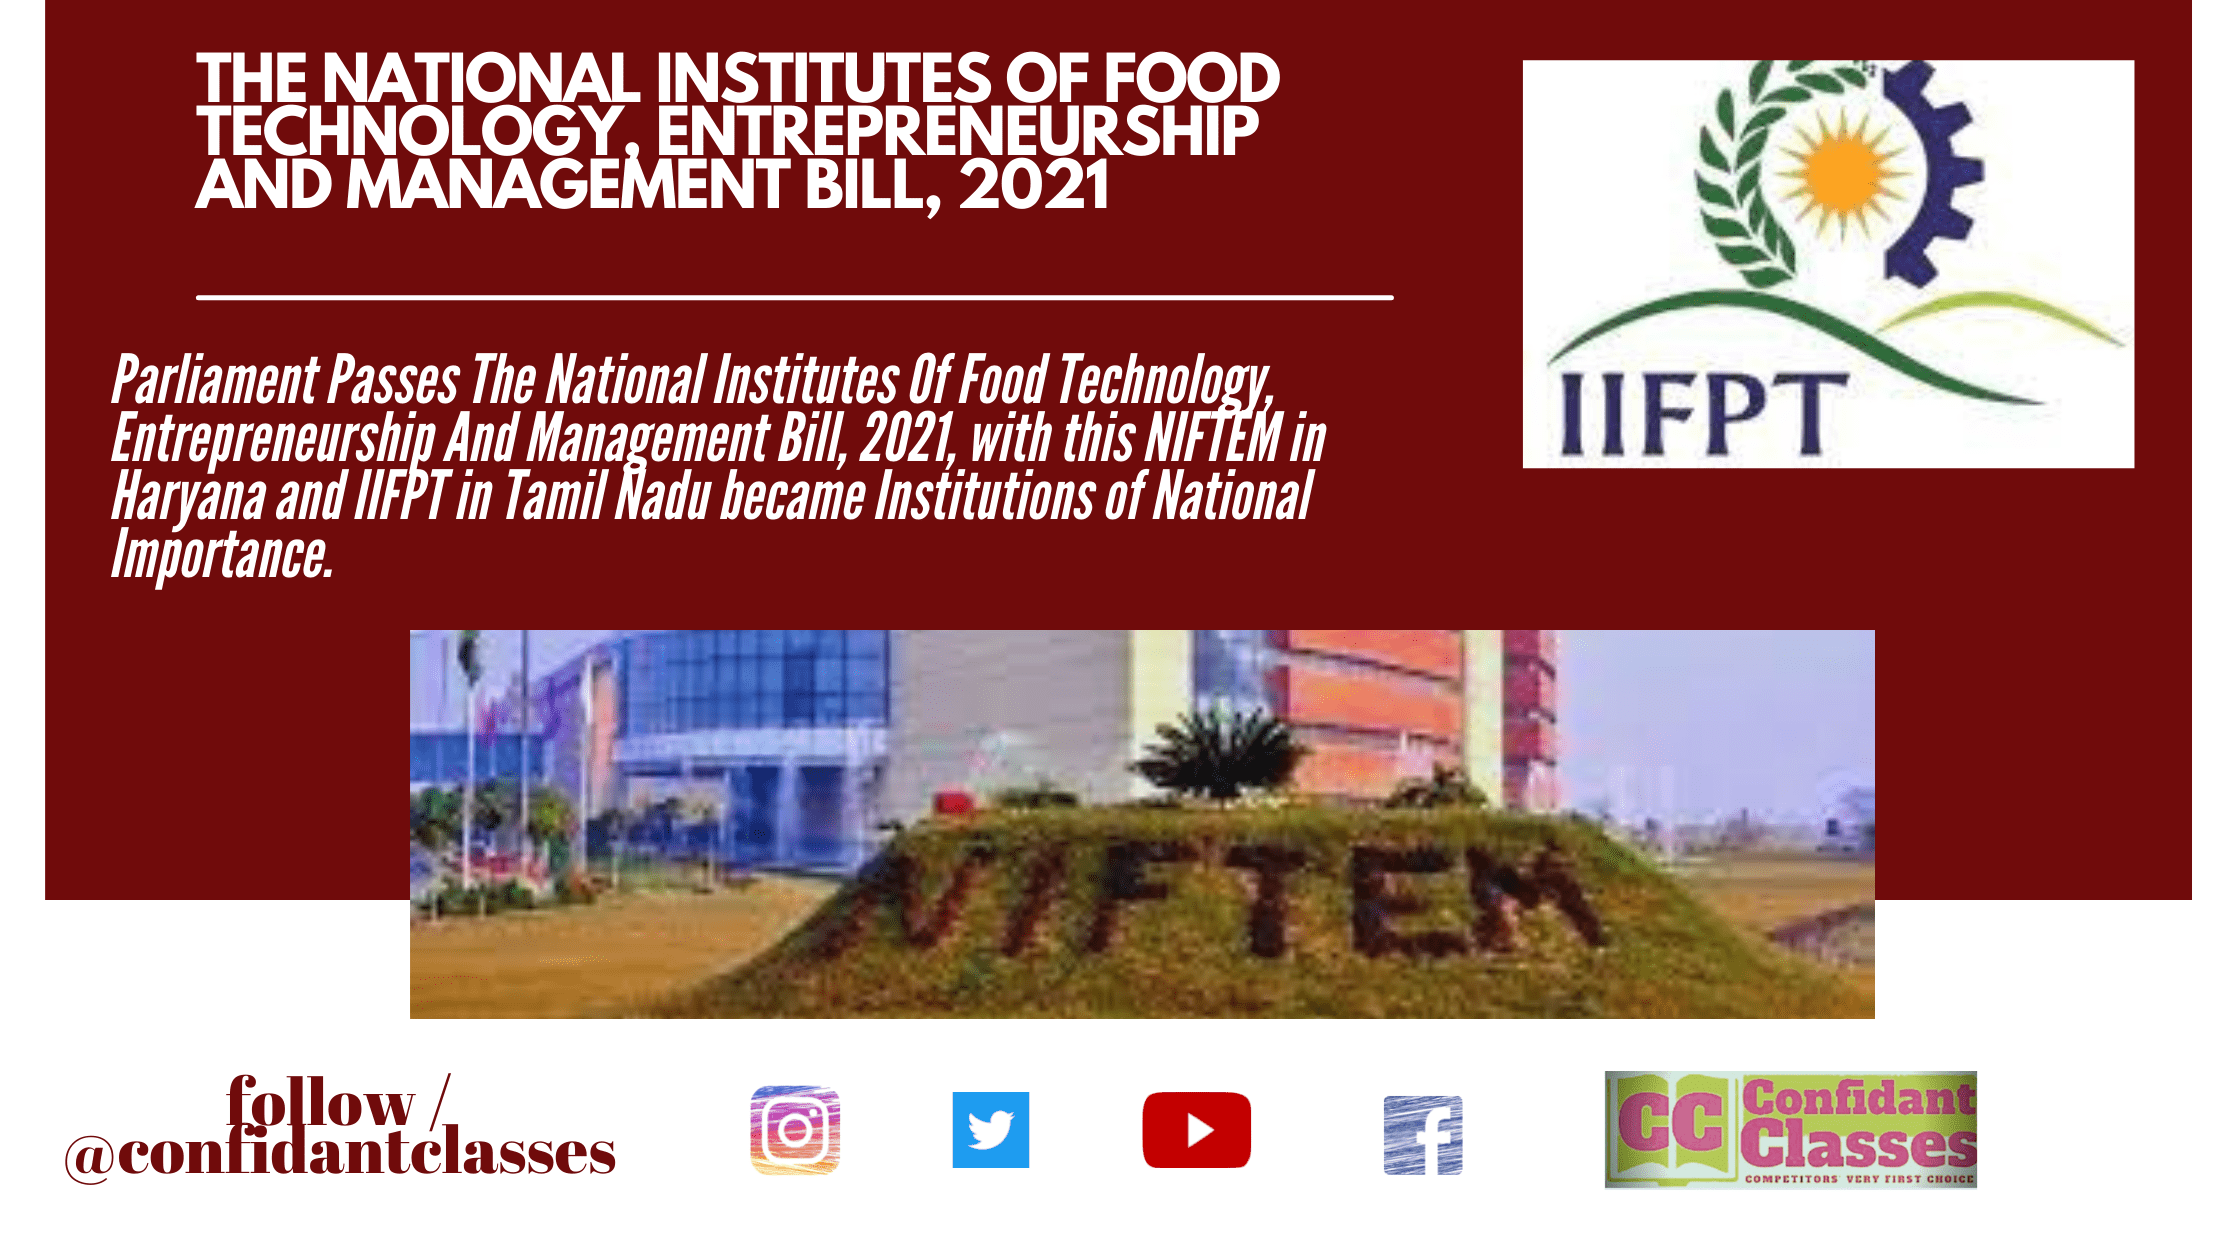 The National Institutes Of Food Technology, Entrepreneurship And Management Bill, 2021